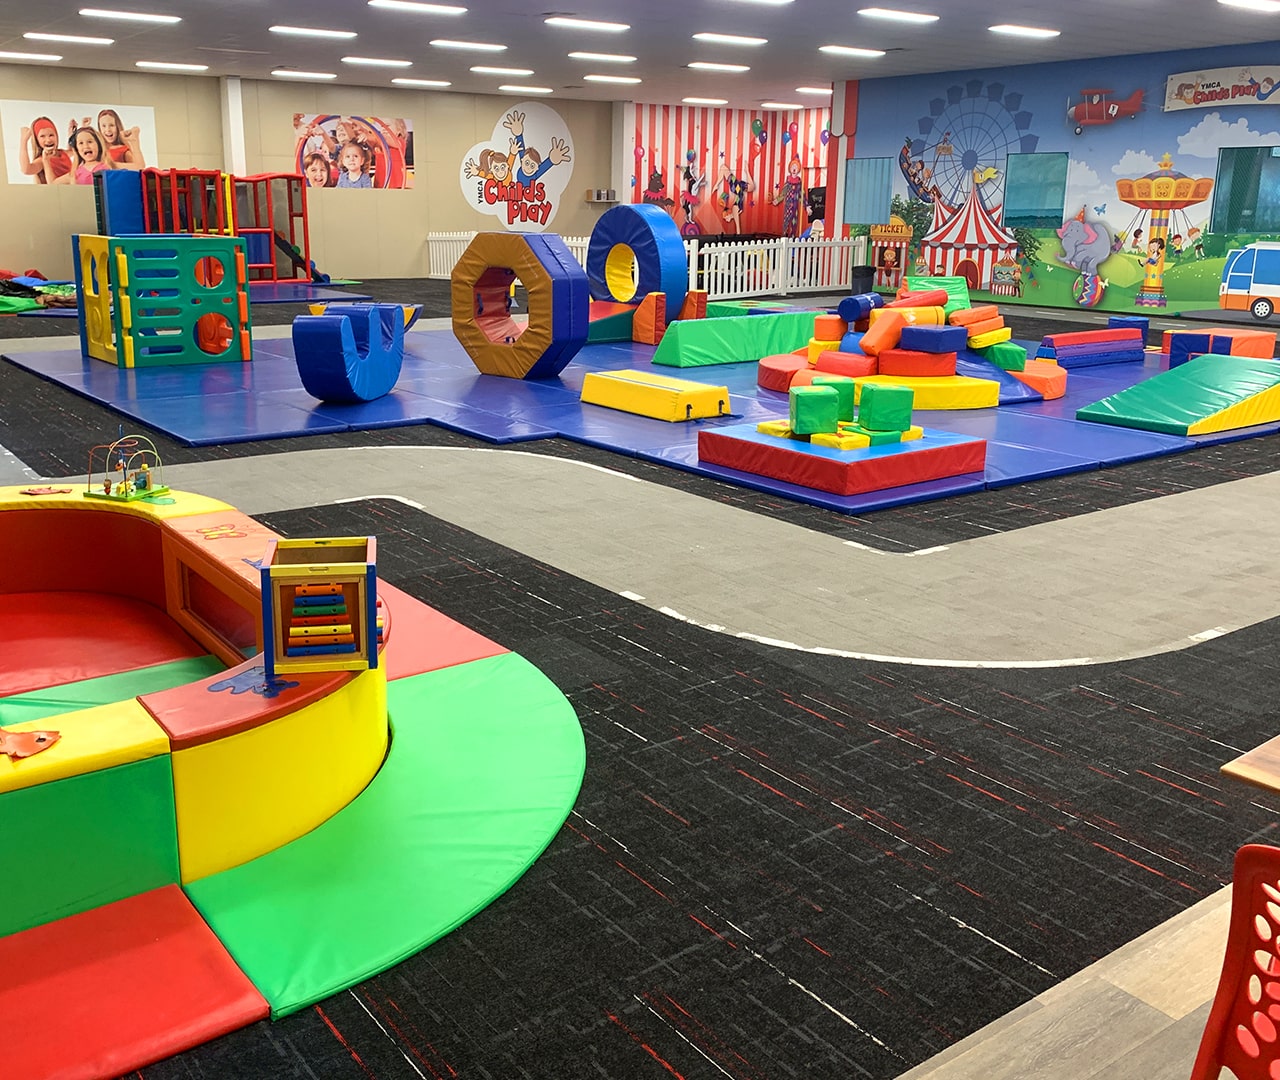 Large, colourful children's indoor play area with lots of equipment